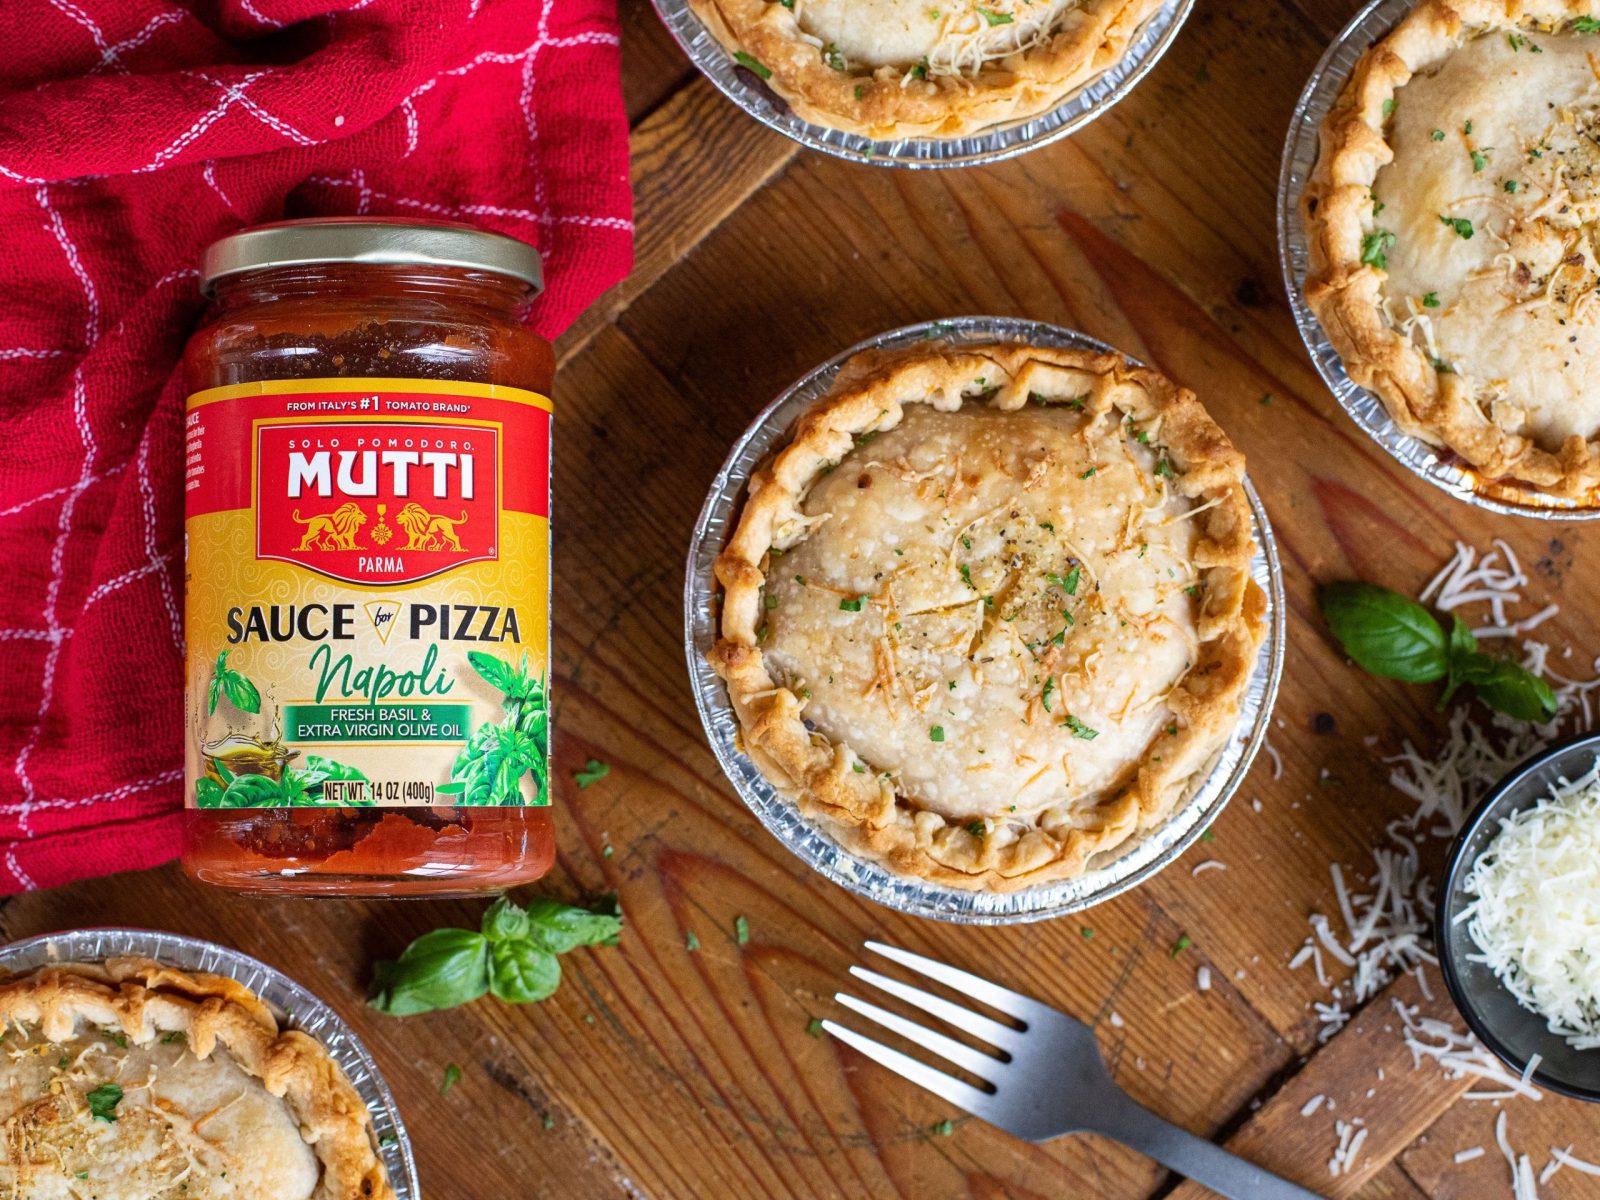 Loaded Pizza Pot Pies Are The Perfect Recipe To Go With The Mutti Sauce For Pizza Coupon!